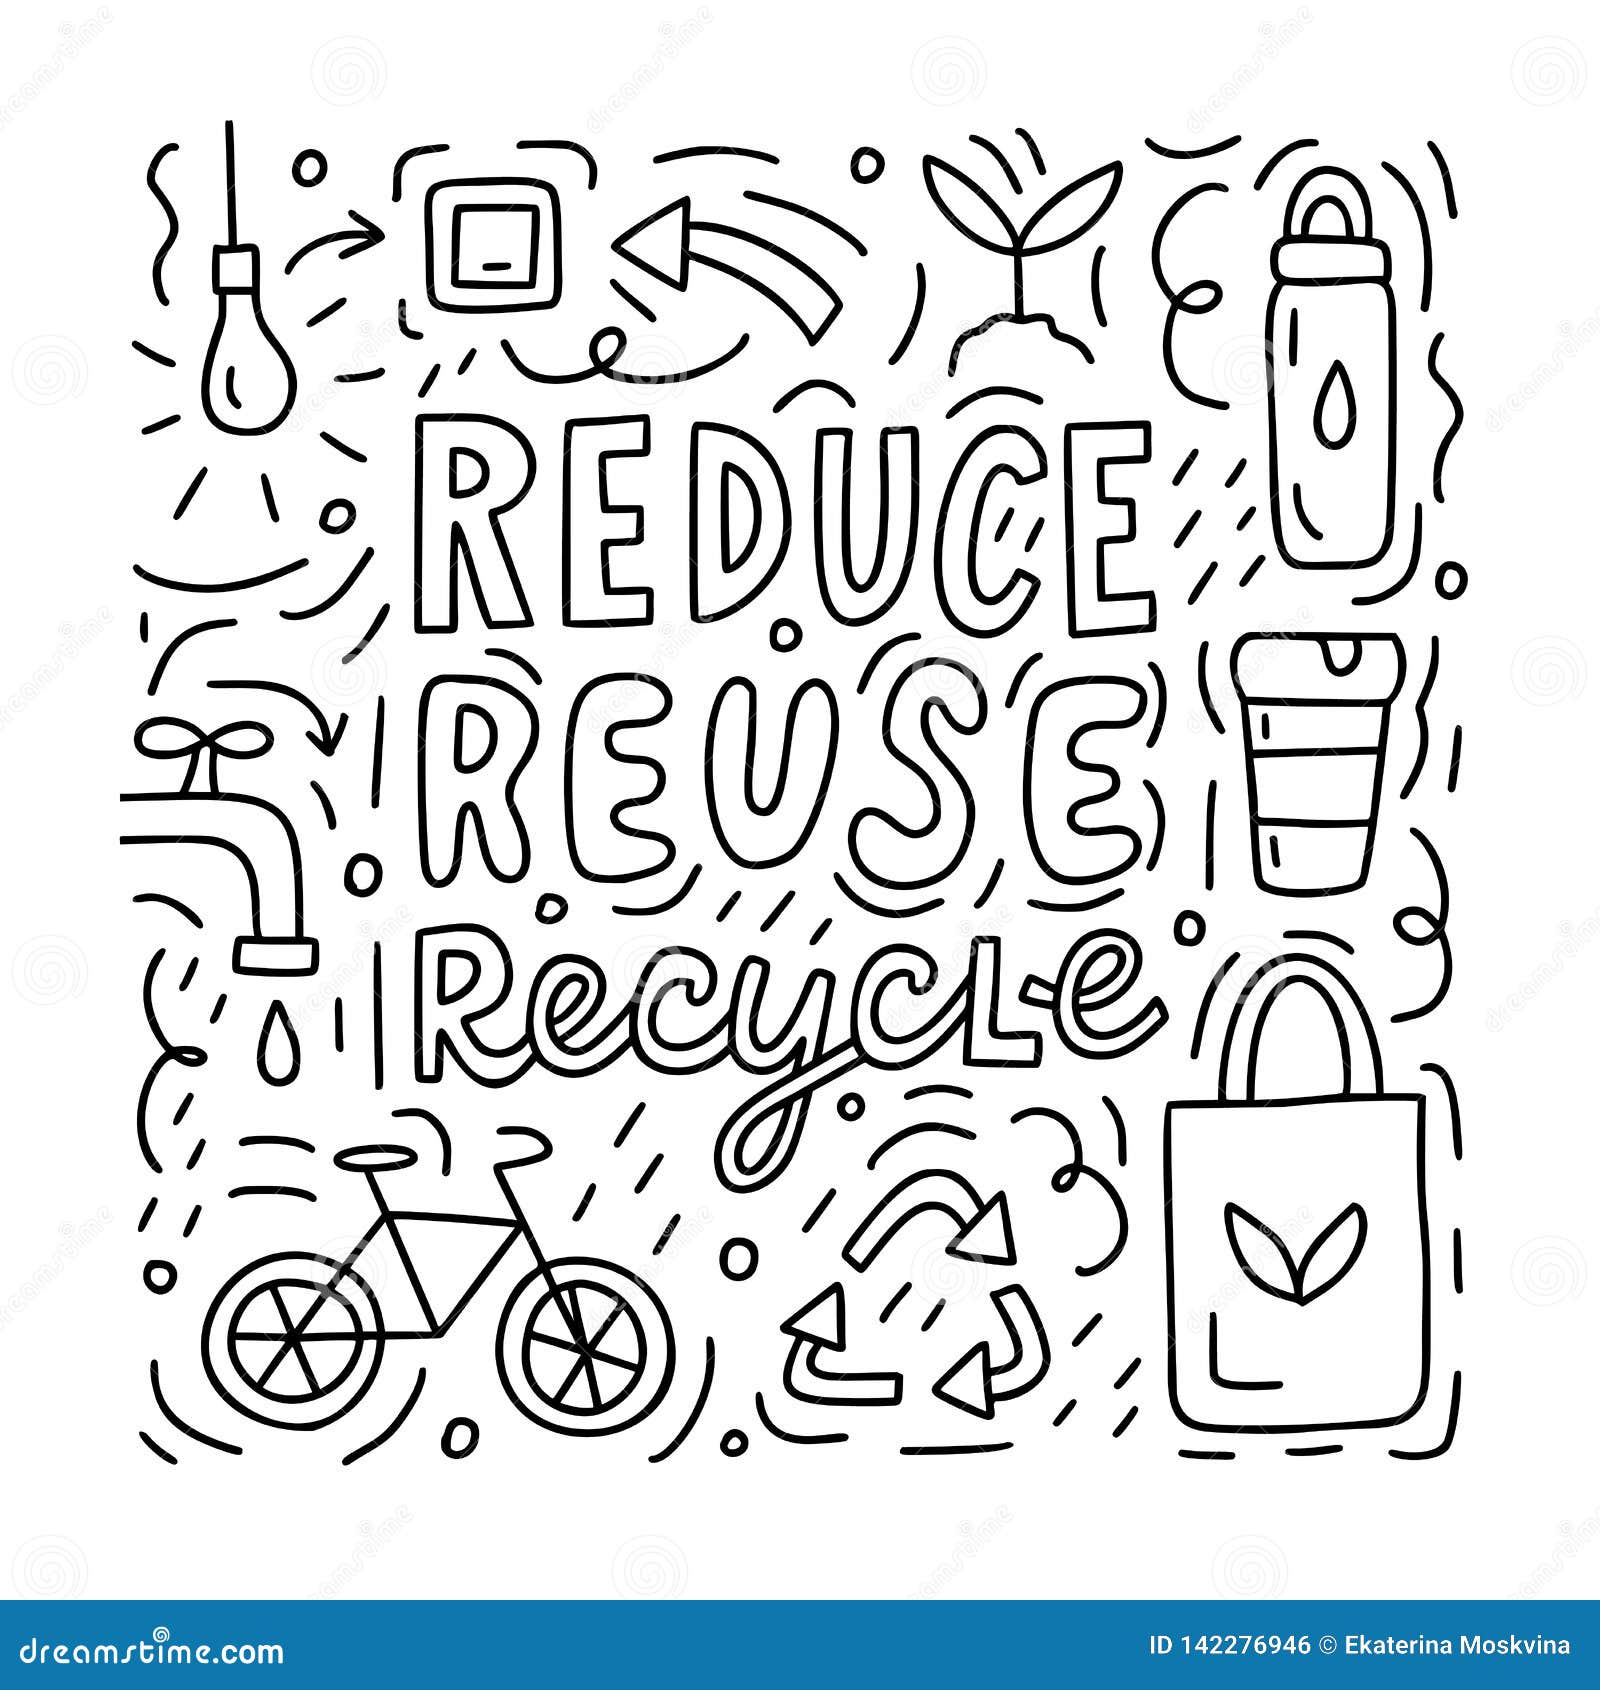 reduce reuse recycle doodle concept